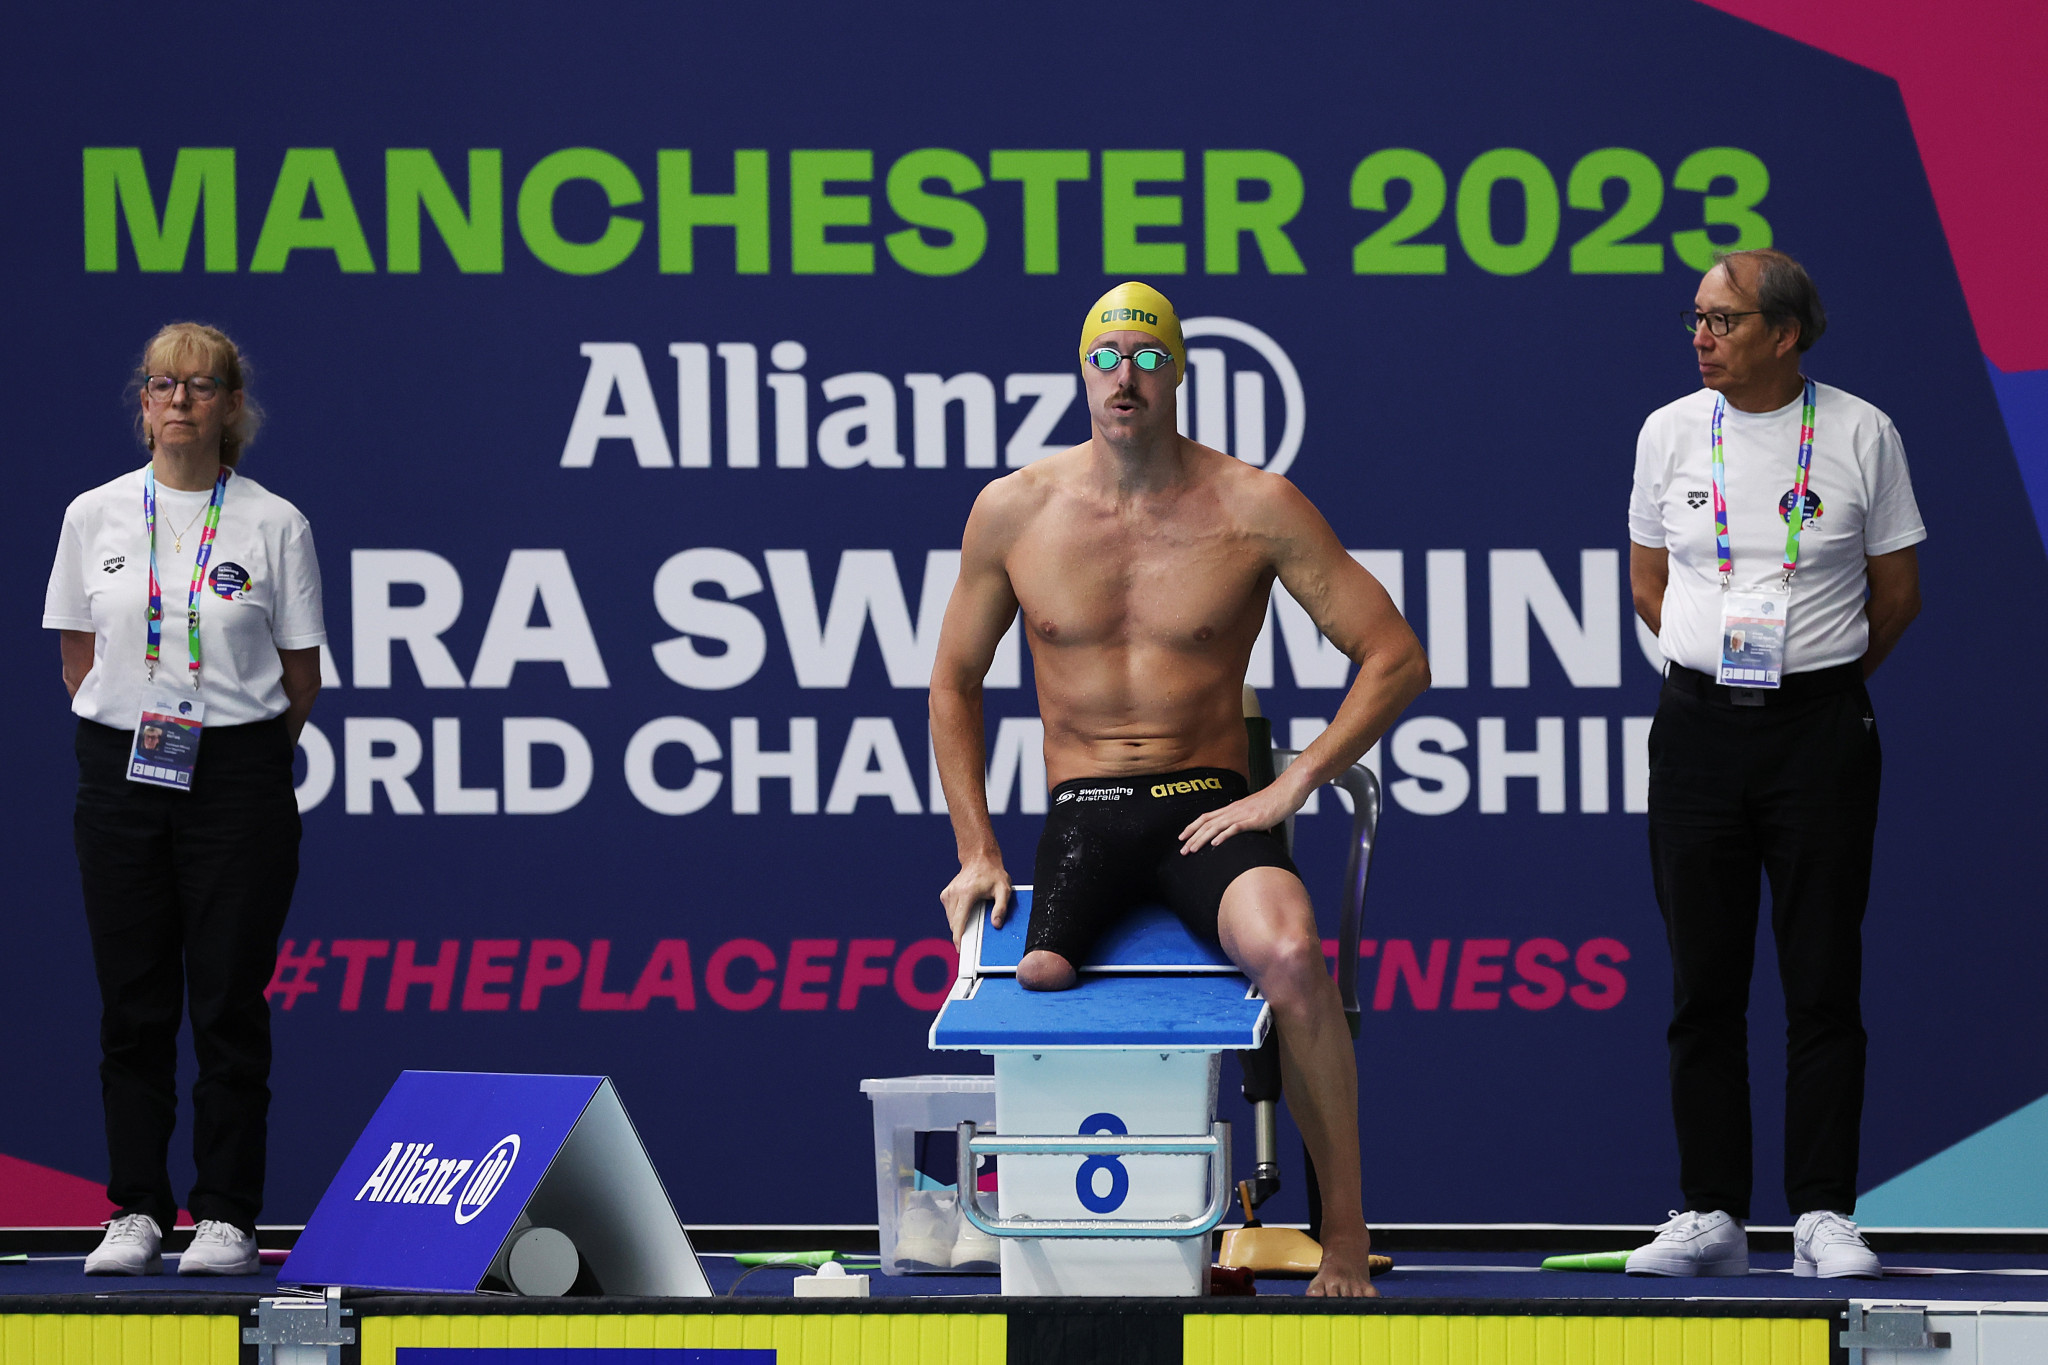 Talks continued between the IPC and UK Sports in Manchester when it staged the Para Swimming World Championships ©Getty Images